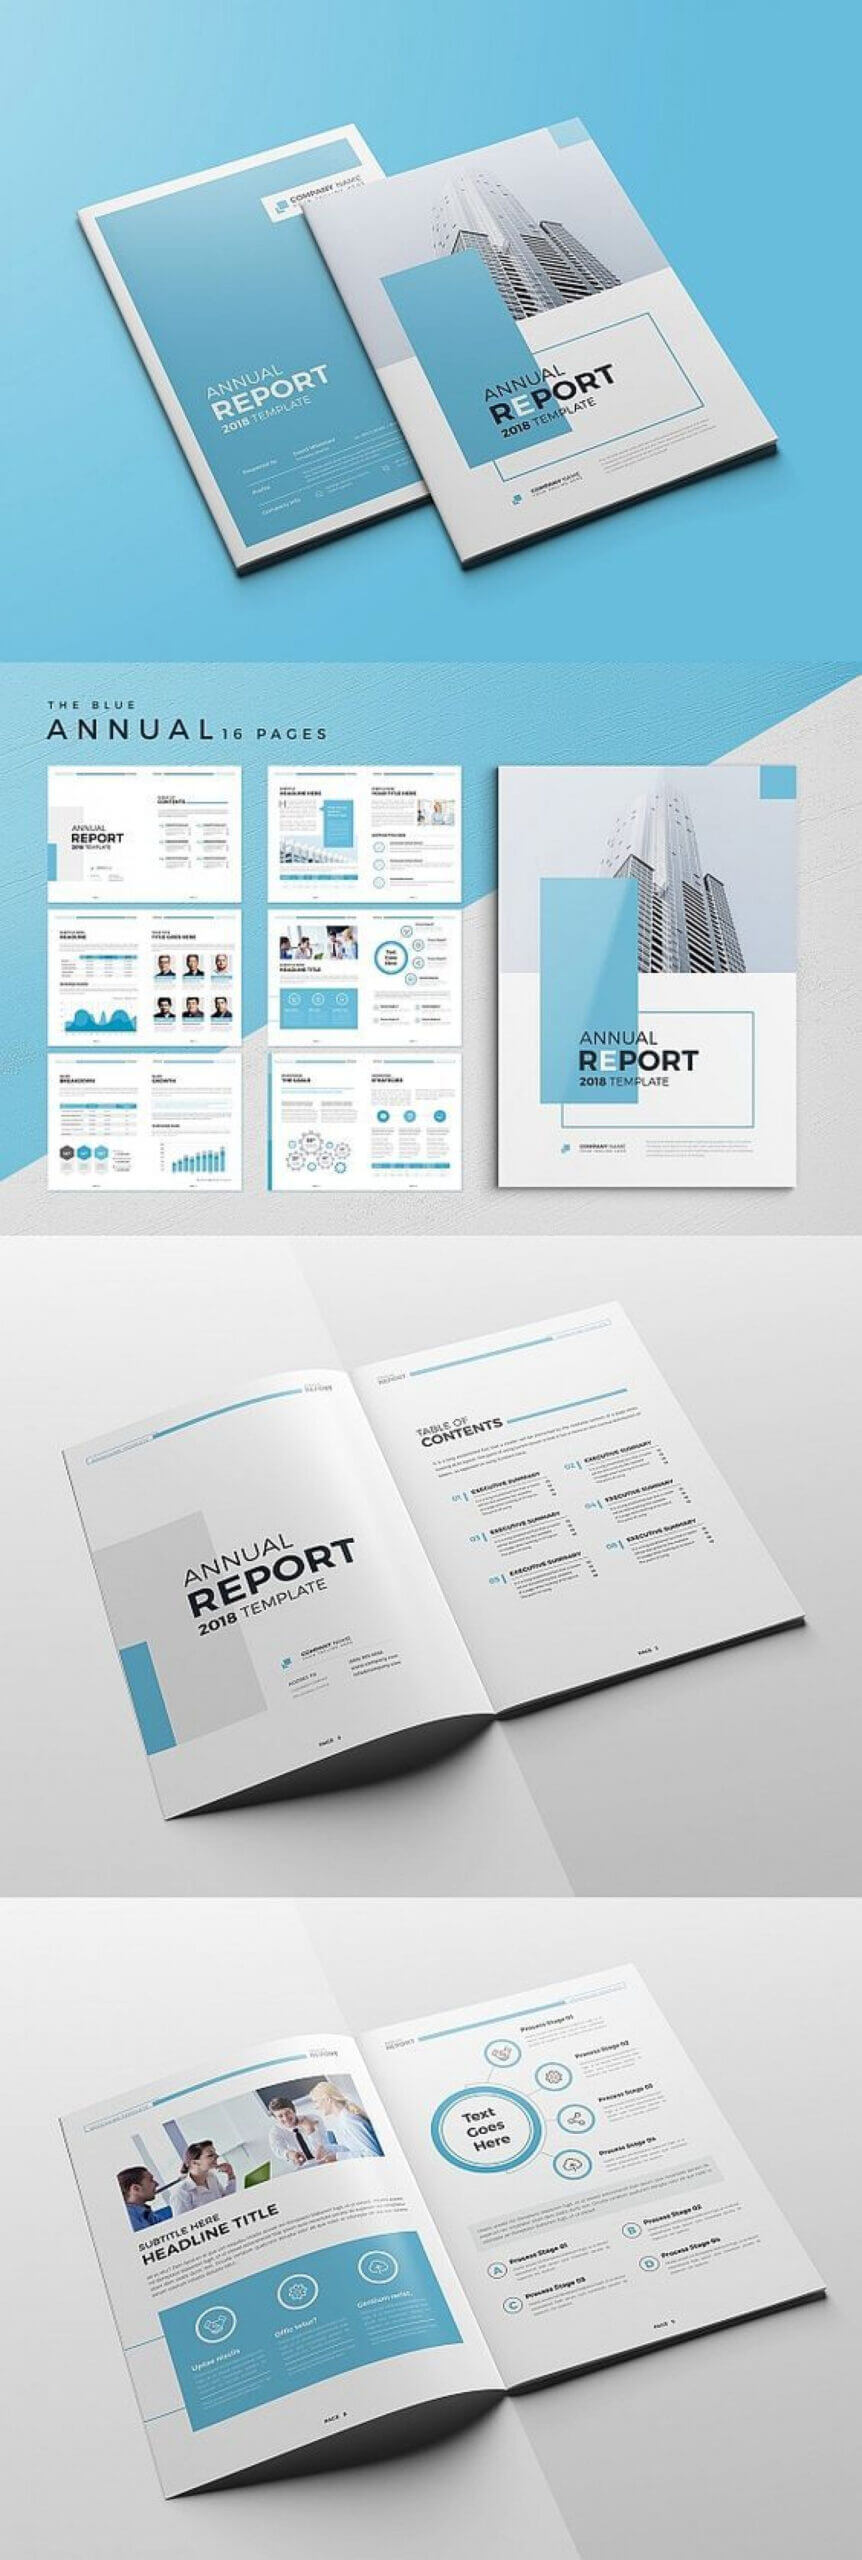 010 Creative Annual Report Template Word Marvelous Ideas Inside Annual Report Template Word